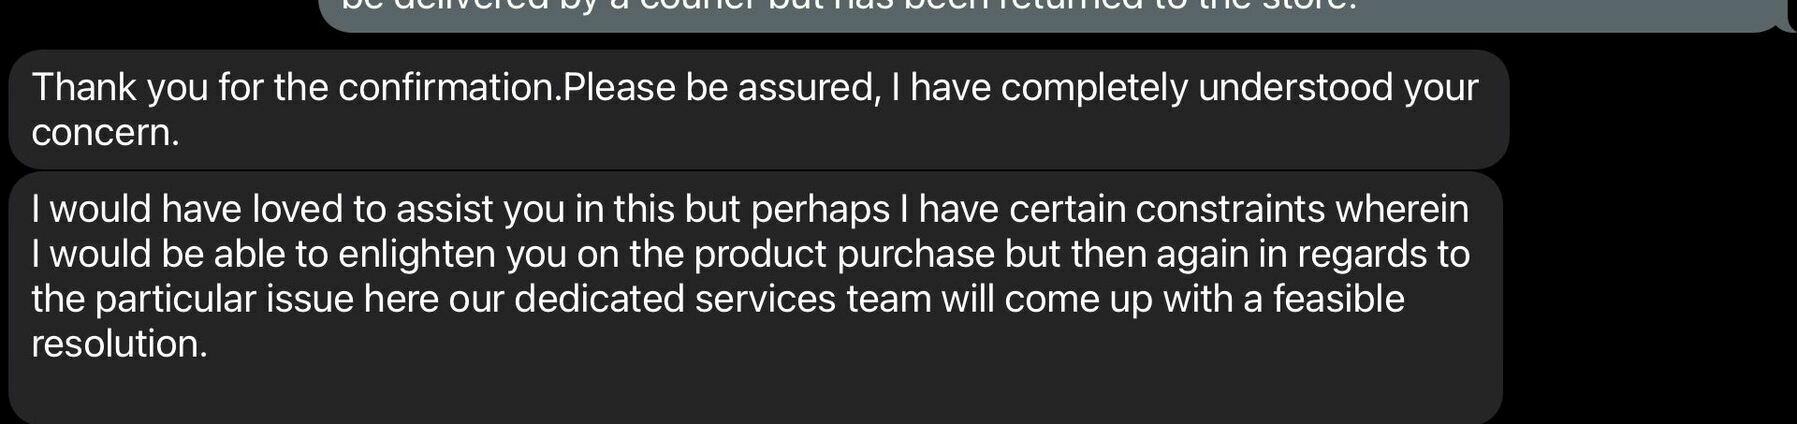 screenshot of a chat session with text: Thank you for the confirmation. Please be assured, I have completely understood your concern.
I would have loved to assist you in this but perhaps I have certain constraints wherein I would be able to enlighten you on the product purchase but then again in regards to the particular issue here our dedicated services team will come up with a feasible resolution.